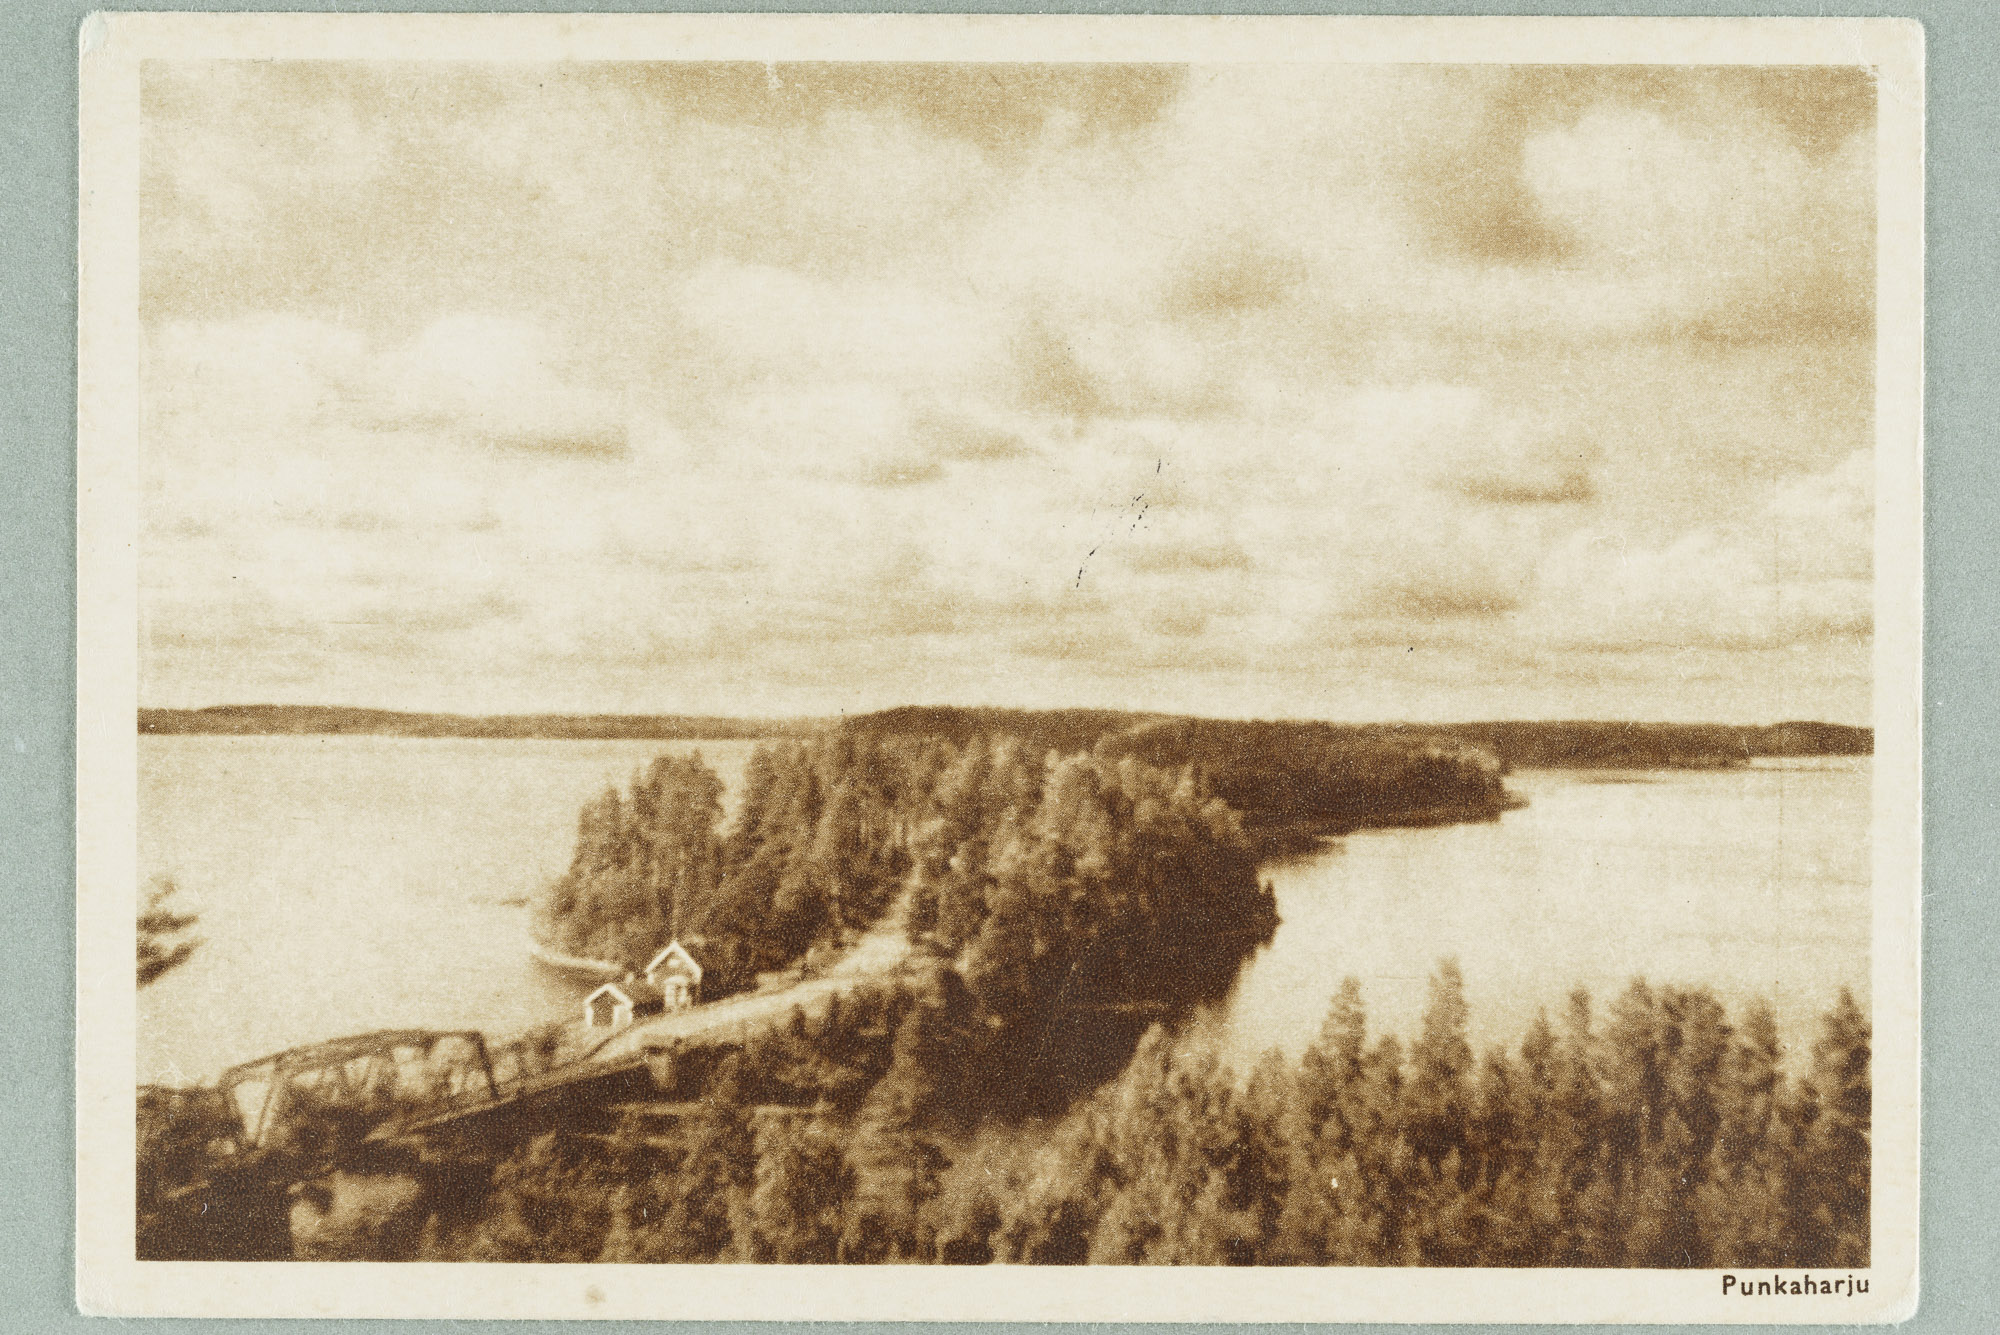 Air picture on Punkaharju towards the windmill